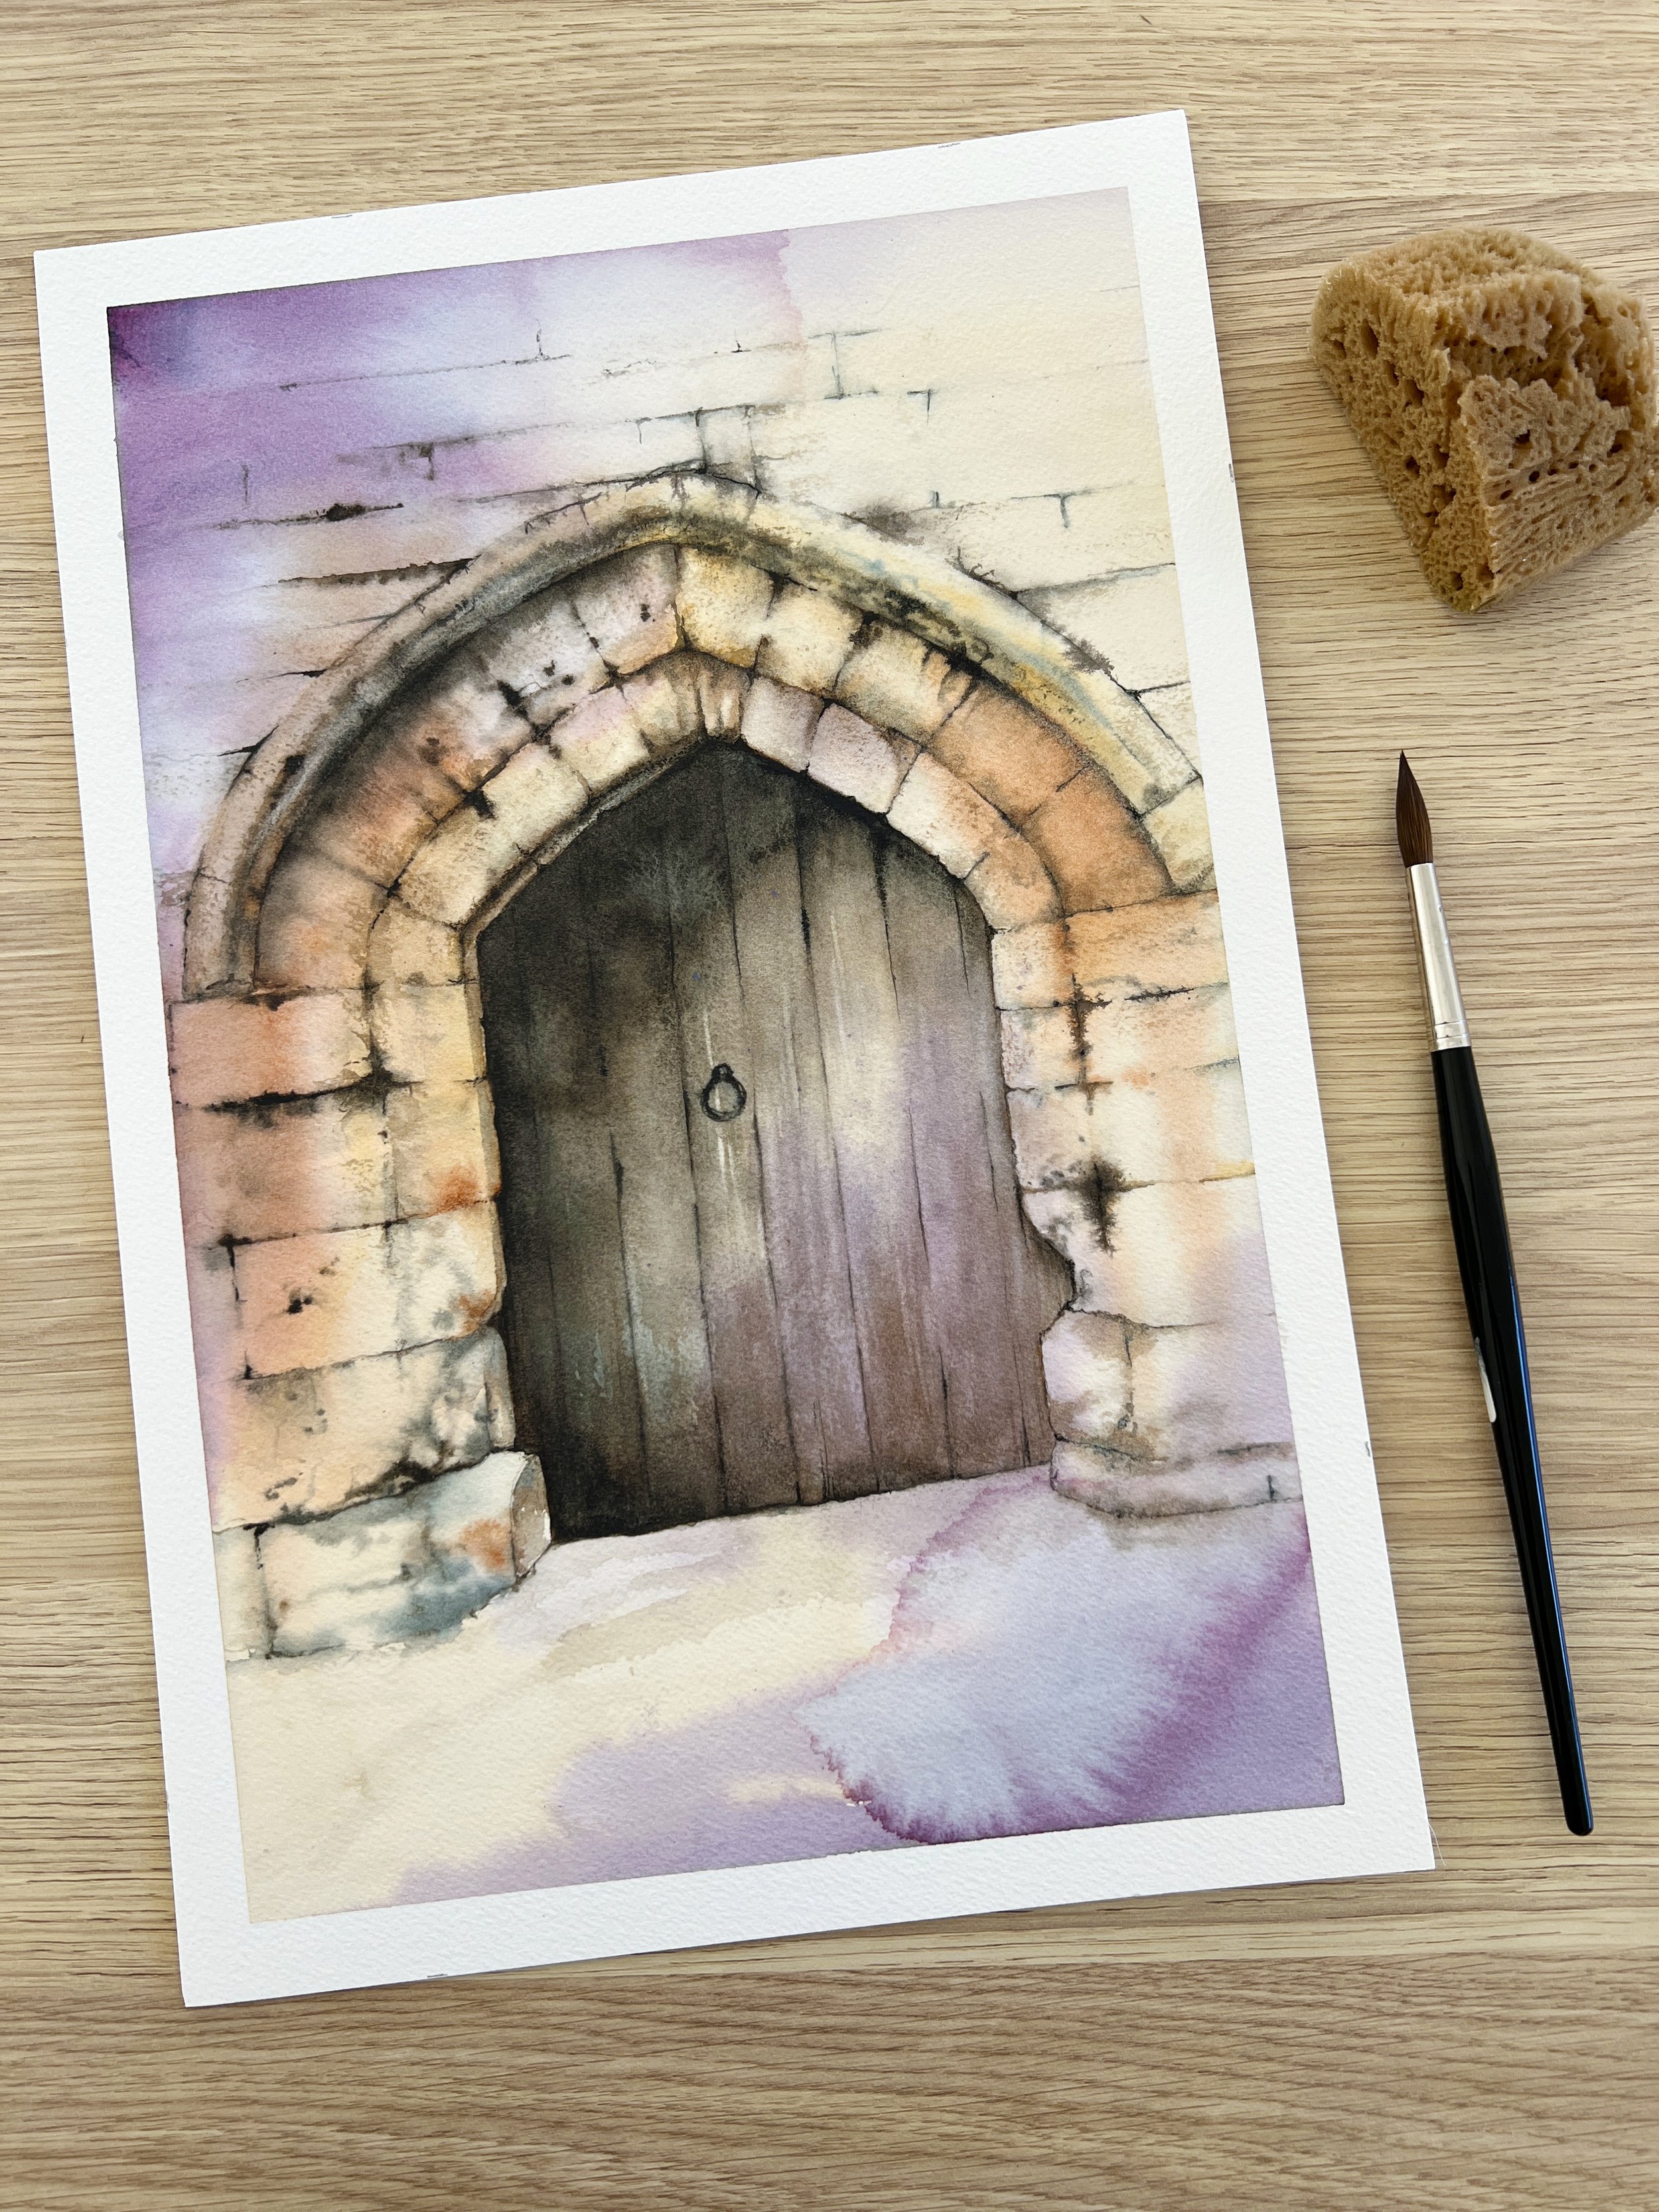 How do you create visual texture in a watercolour painting